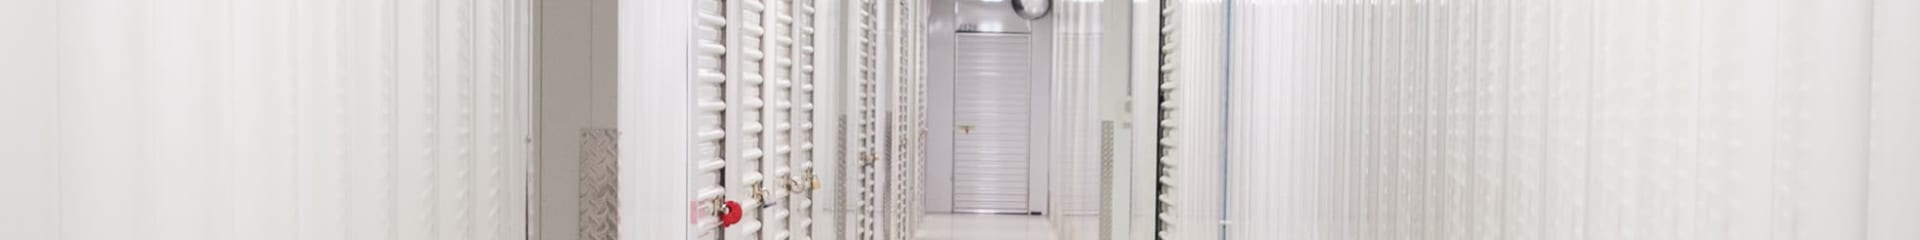 Climate-controlled units at 1-800-Self Storage.com